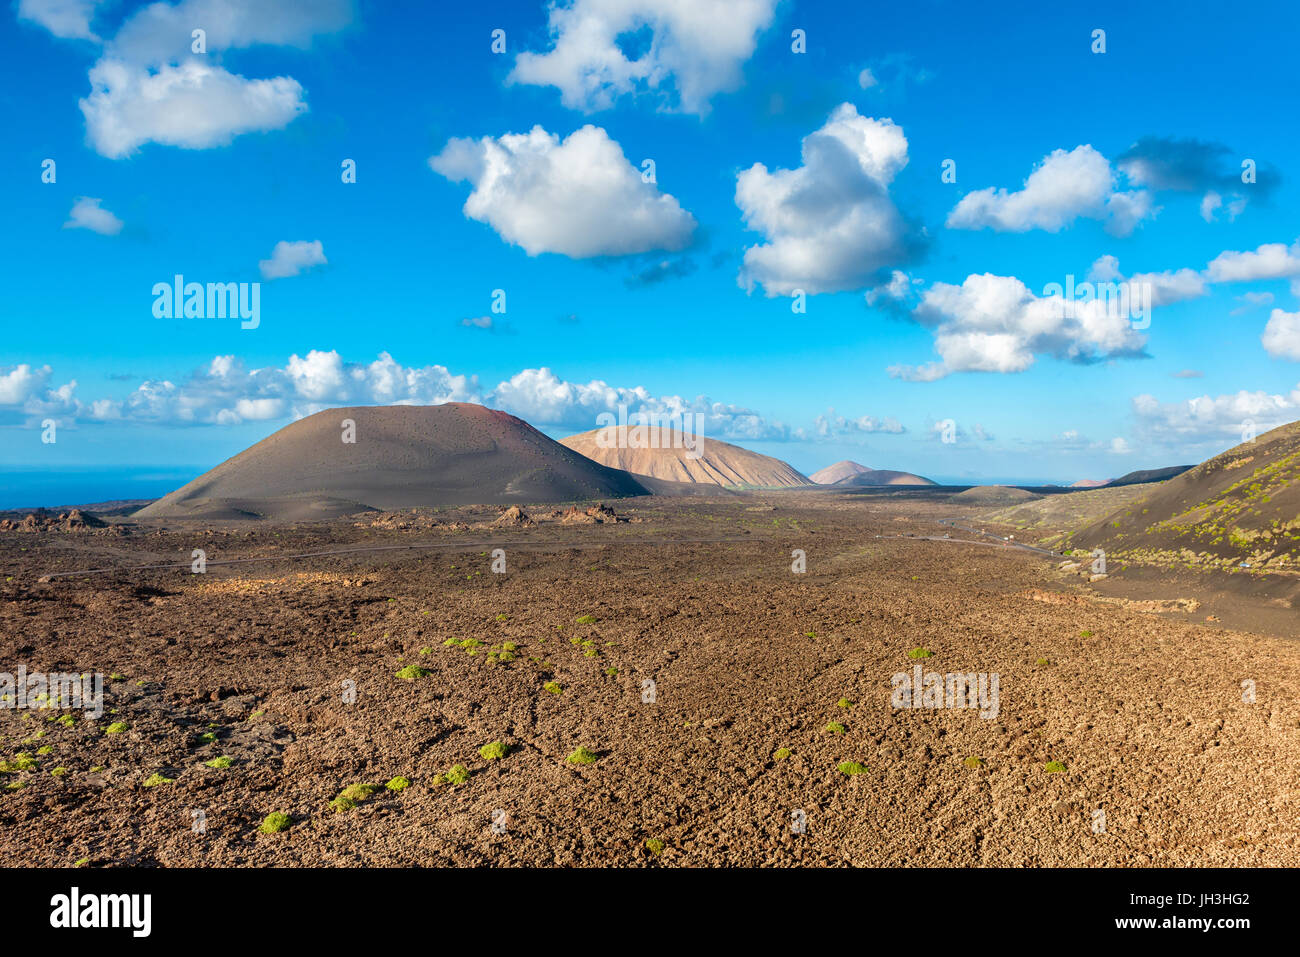 High angle view on Timanfaya National Park, Lanzarote, Canary Islands, Spain Stock Photo